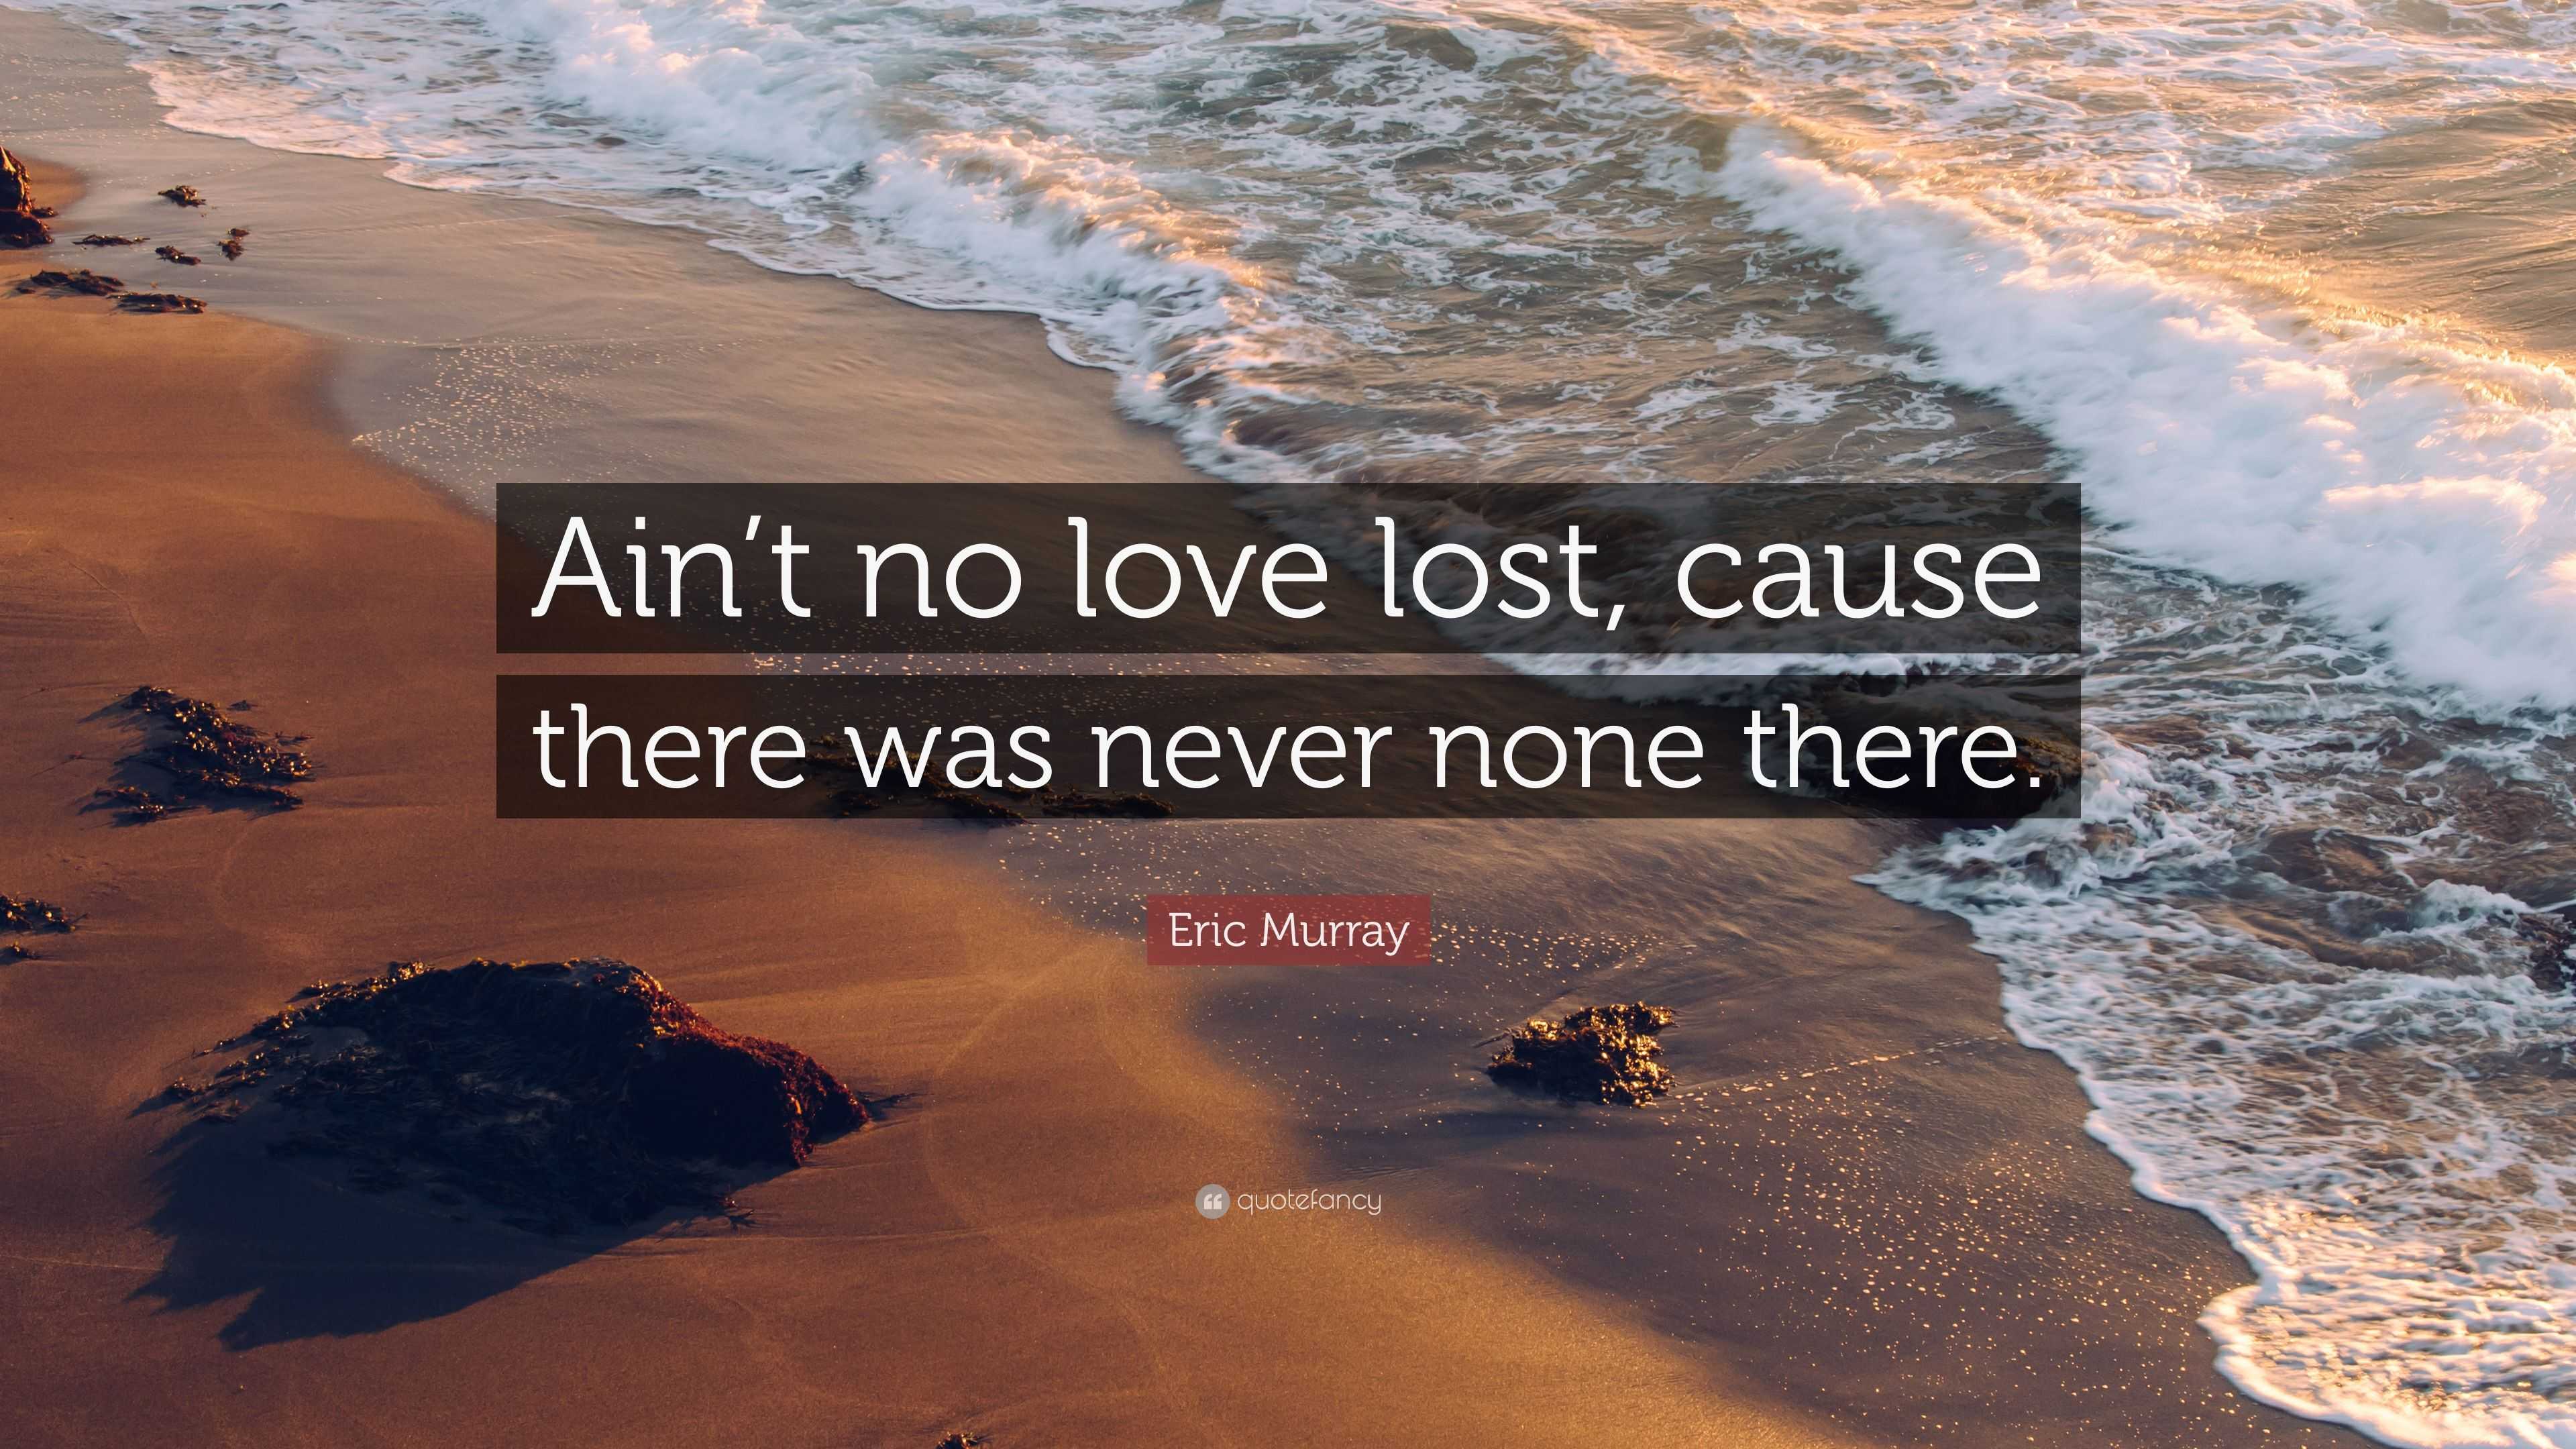 Eric Murray Quote “Ain t no love lost cause there was never